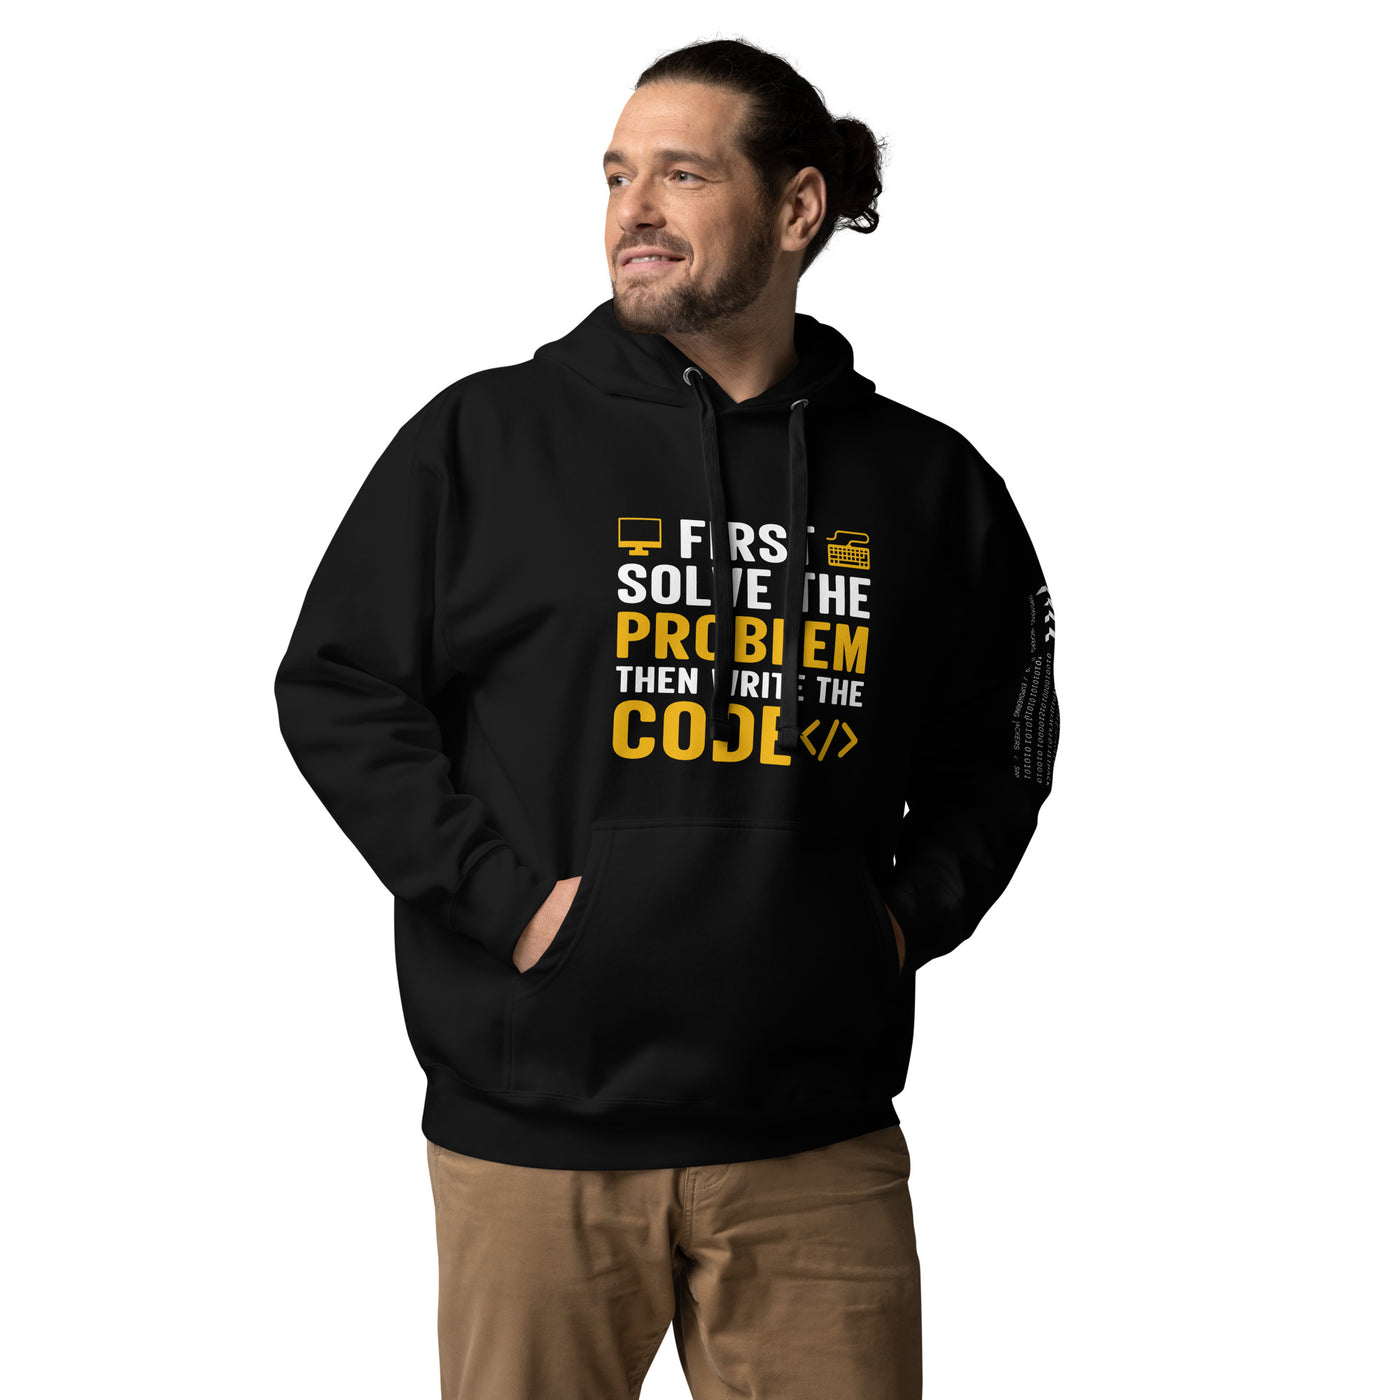 first-solve-the-problem-then-write-the-code Unisex Hoodie